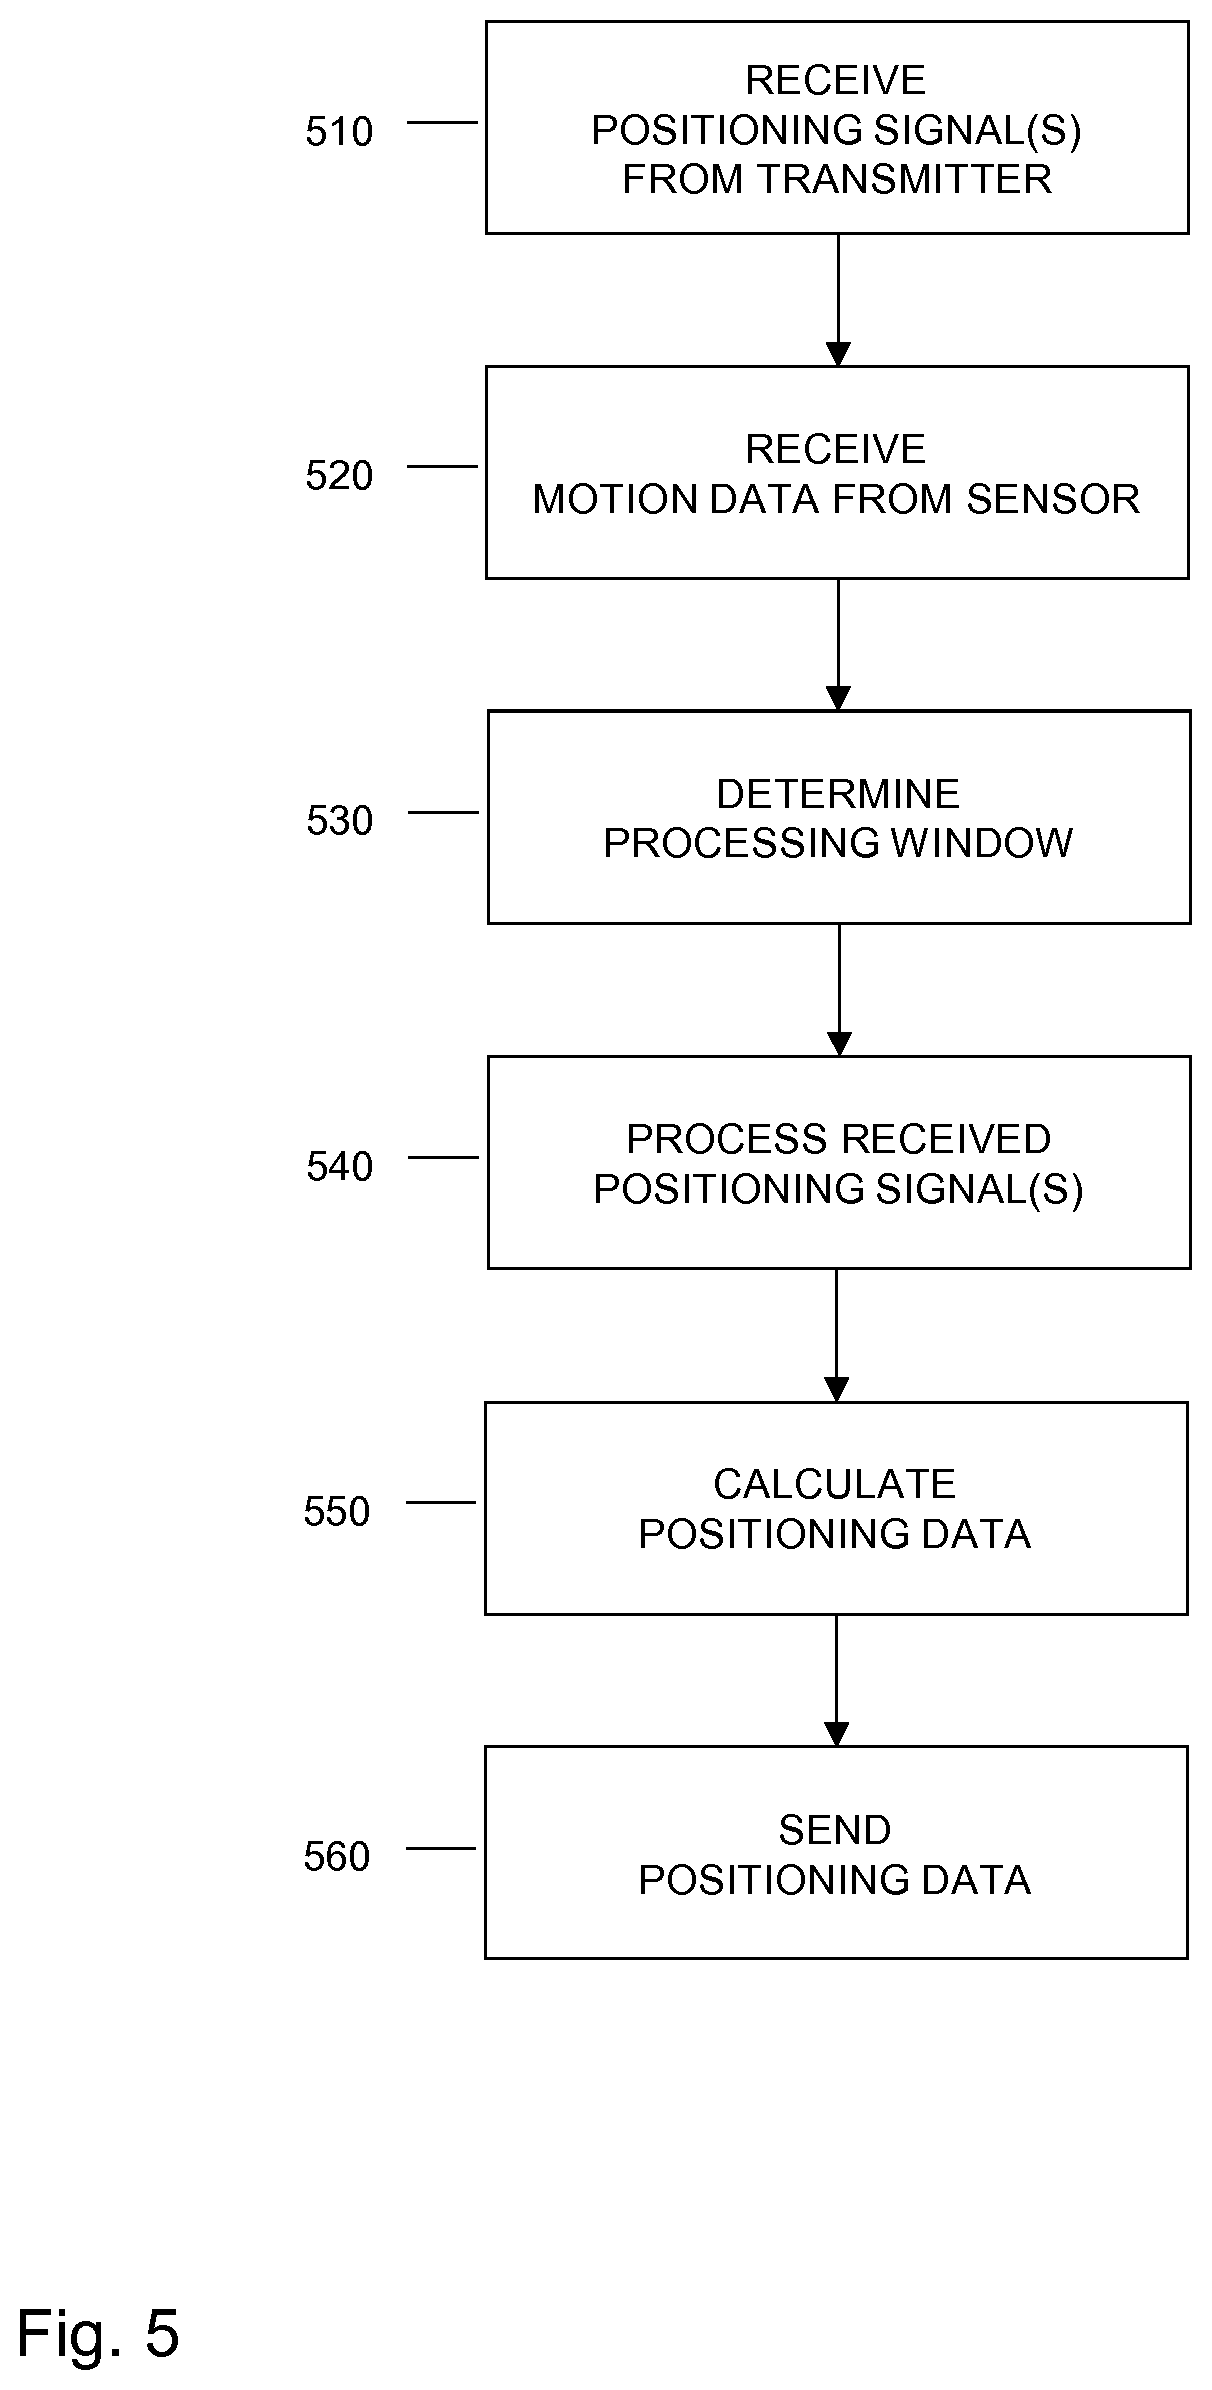 Motion data based processing time window for positioning signals